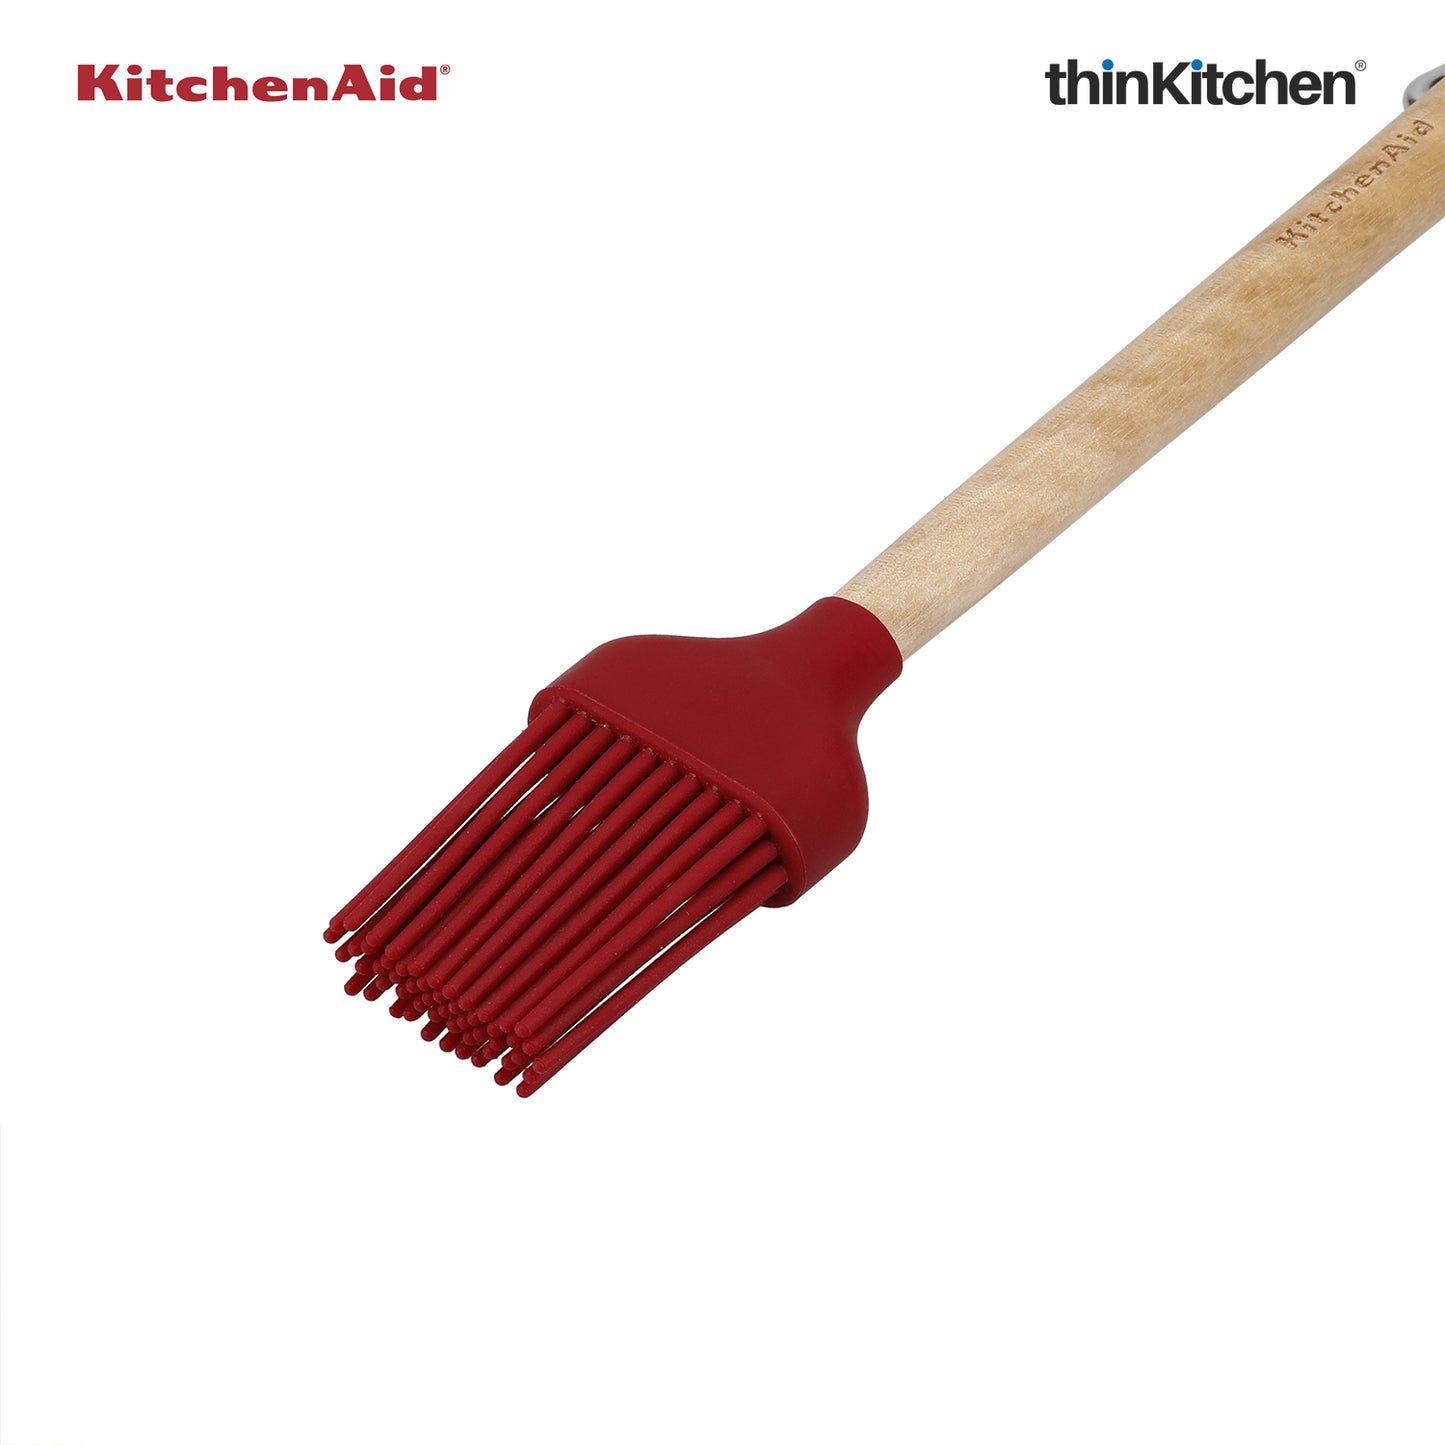 Kitchenaid Birchwood Pastry Brush With Silicone Head Empire Red